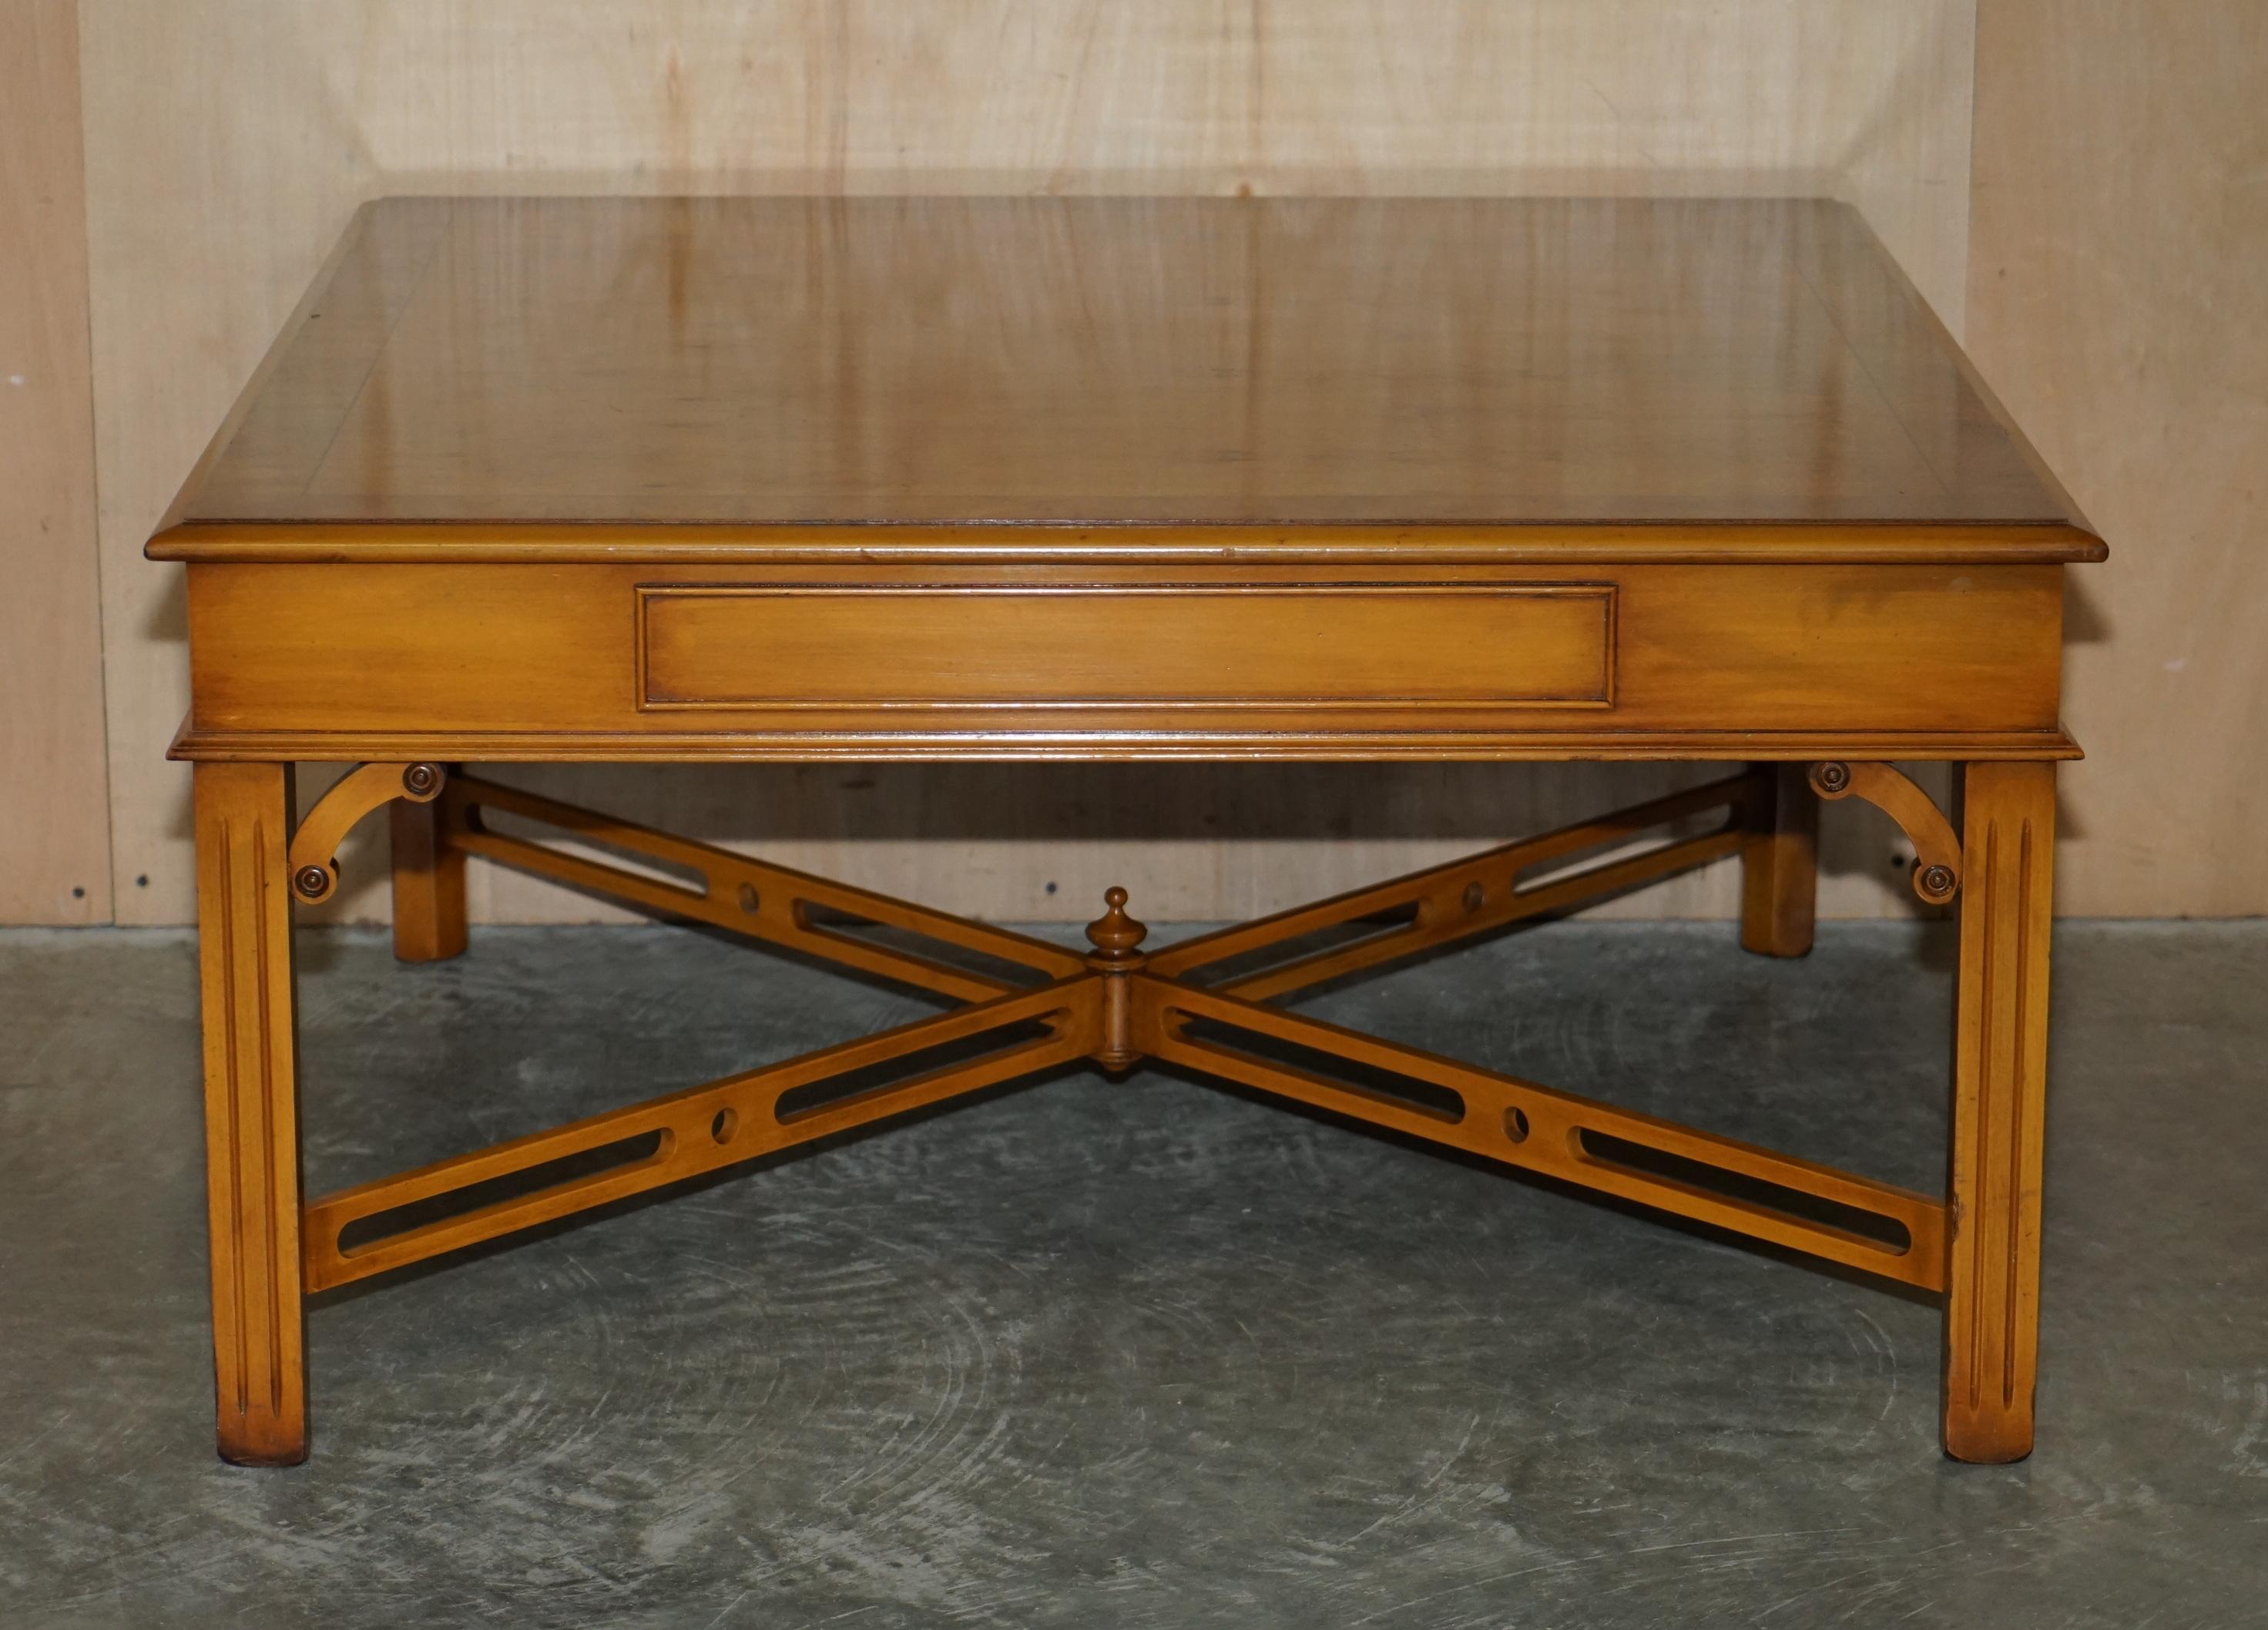 LOVELY BURR YEW WOOD TWO DRAWER COFFEE TABLE WiTH THOMAS CHIPPENDALE STRETCHES im Angebot 8